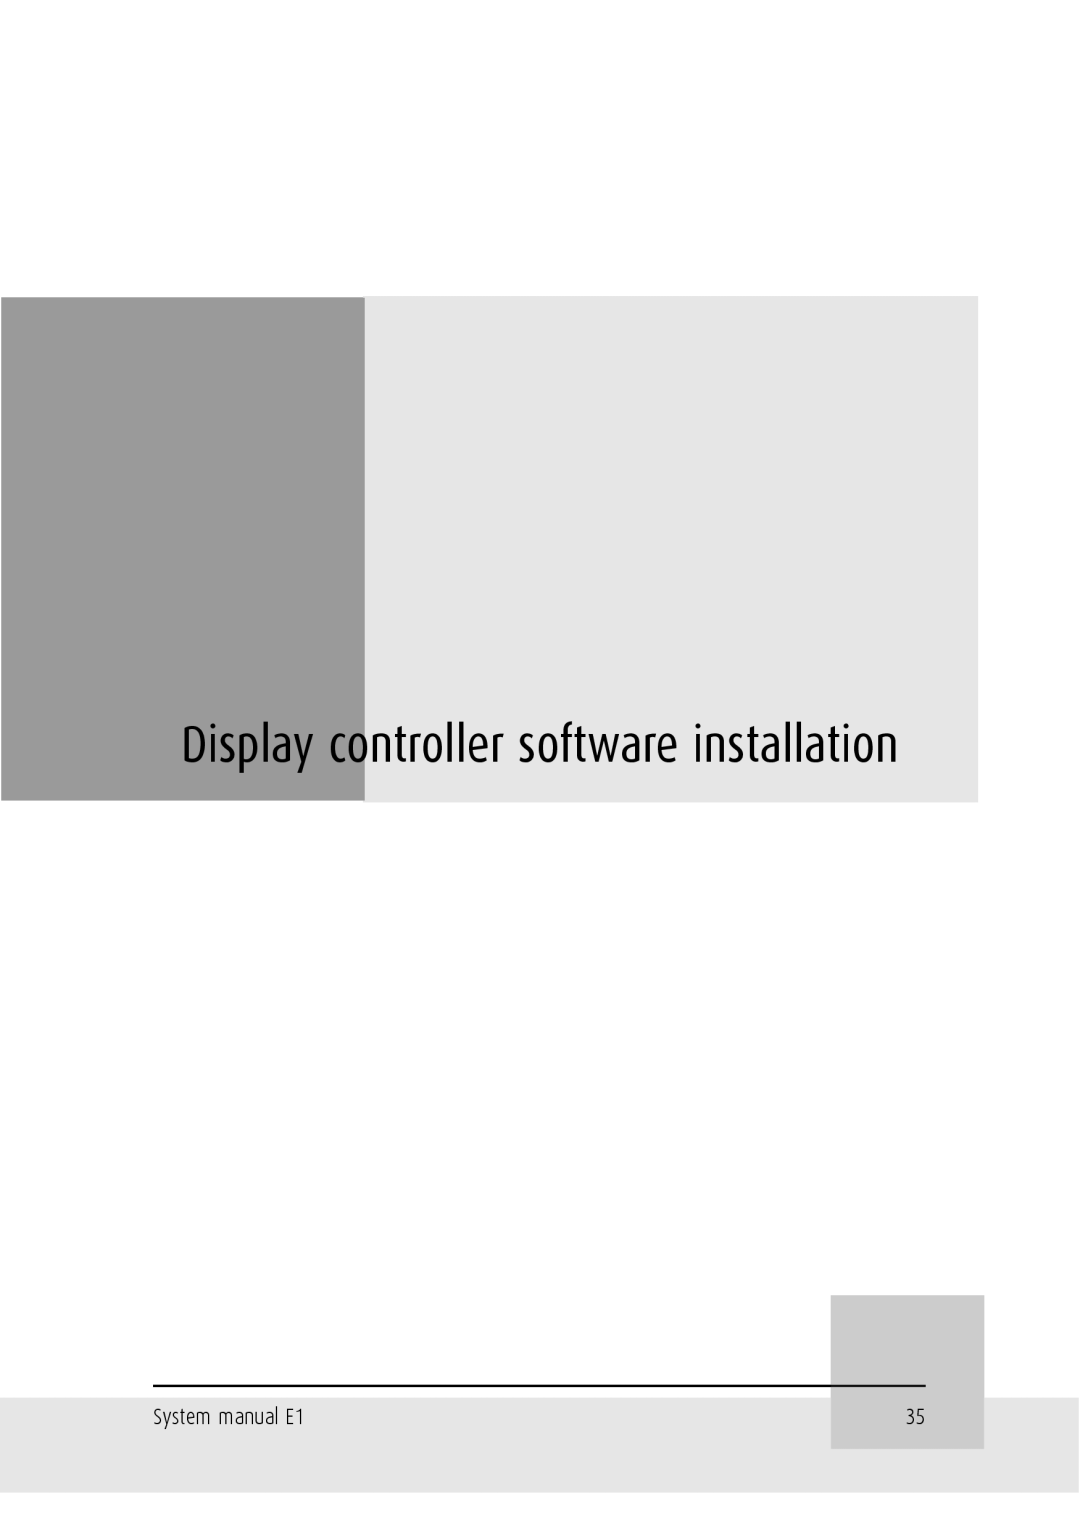 Barco Display controller software installation, System manual E1 